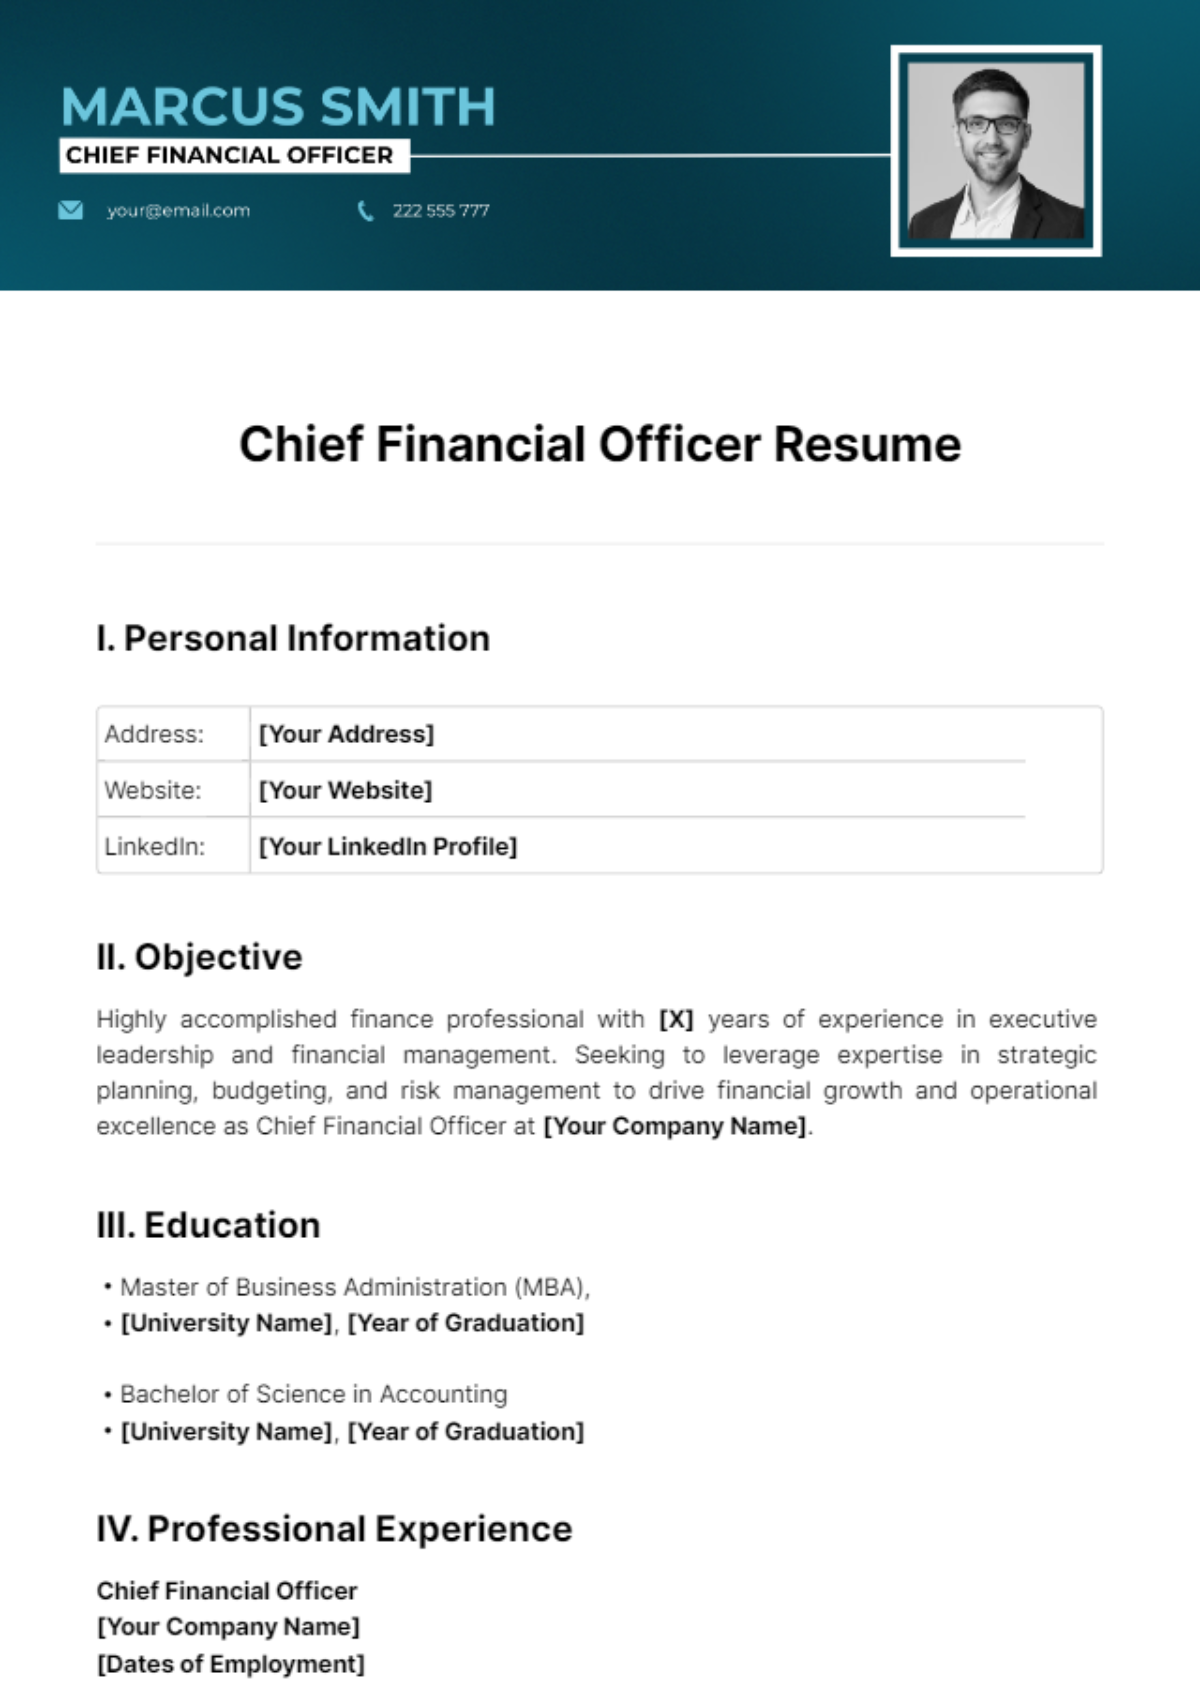 Chief Financial Officer Resume Template